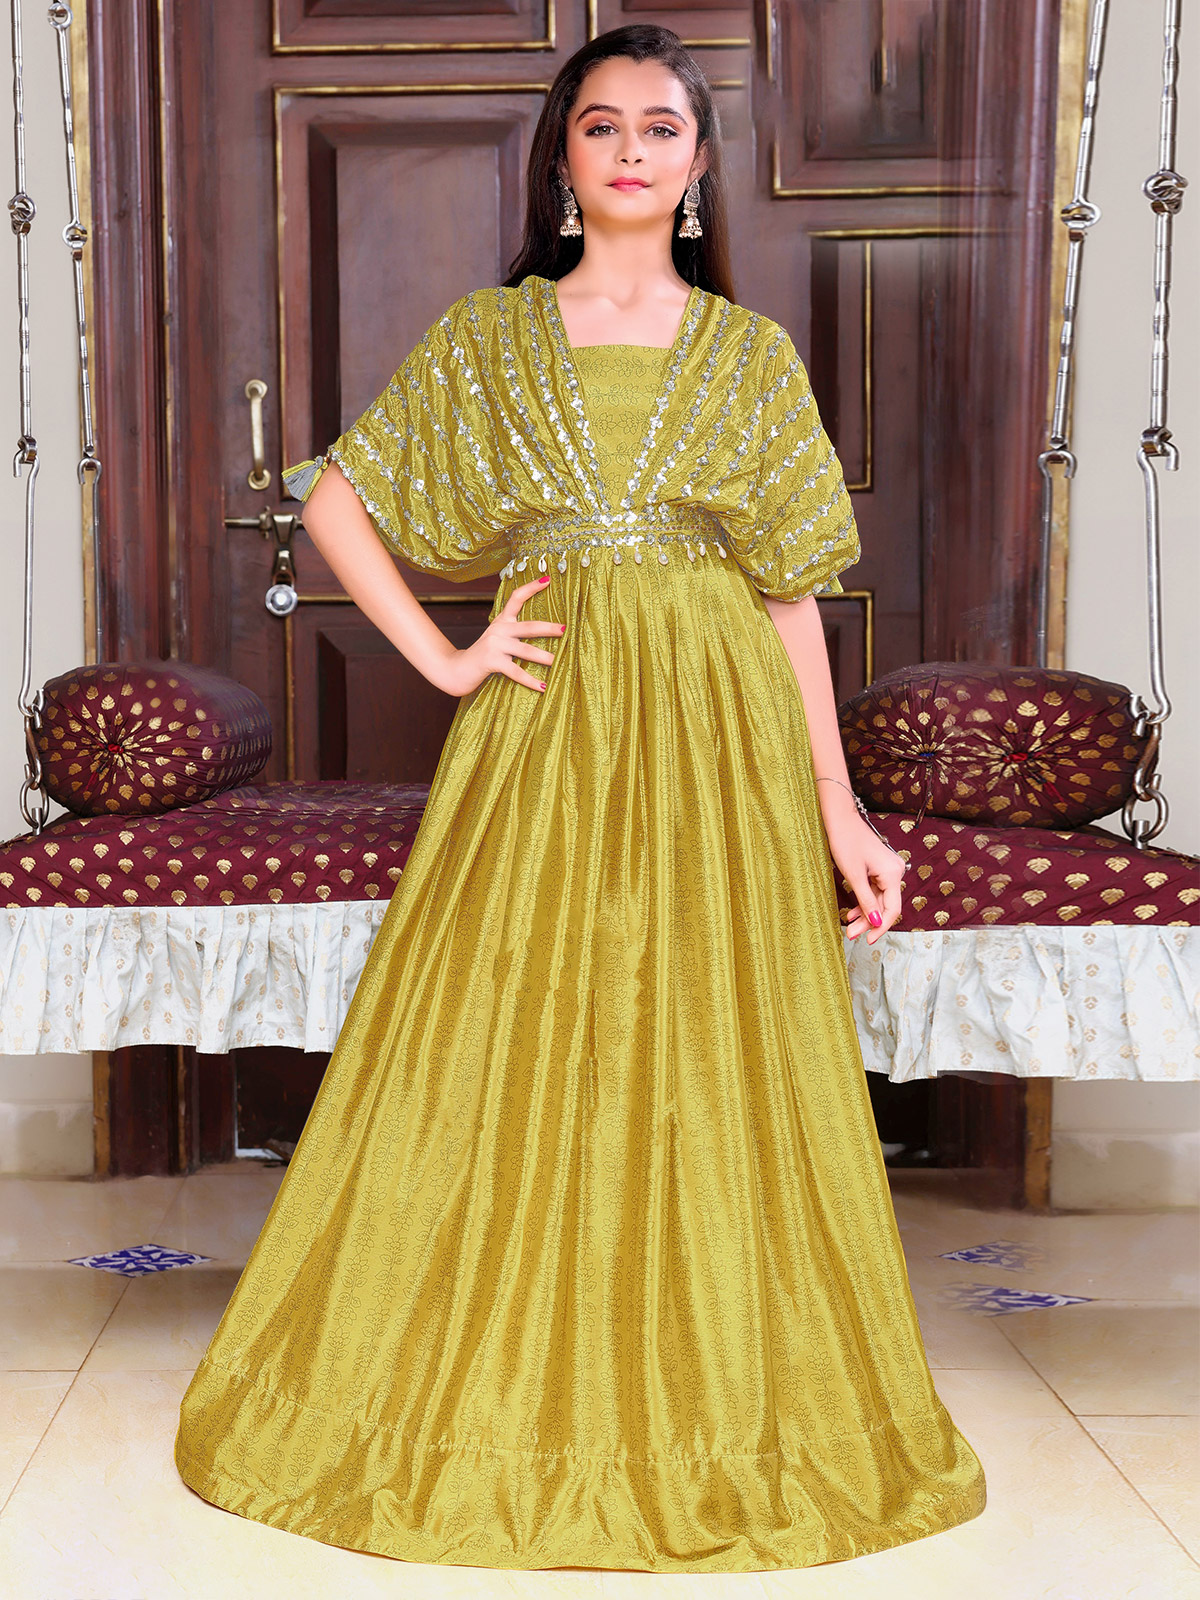 The Amber Gown - YELLOW | Lady Black Tie